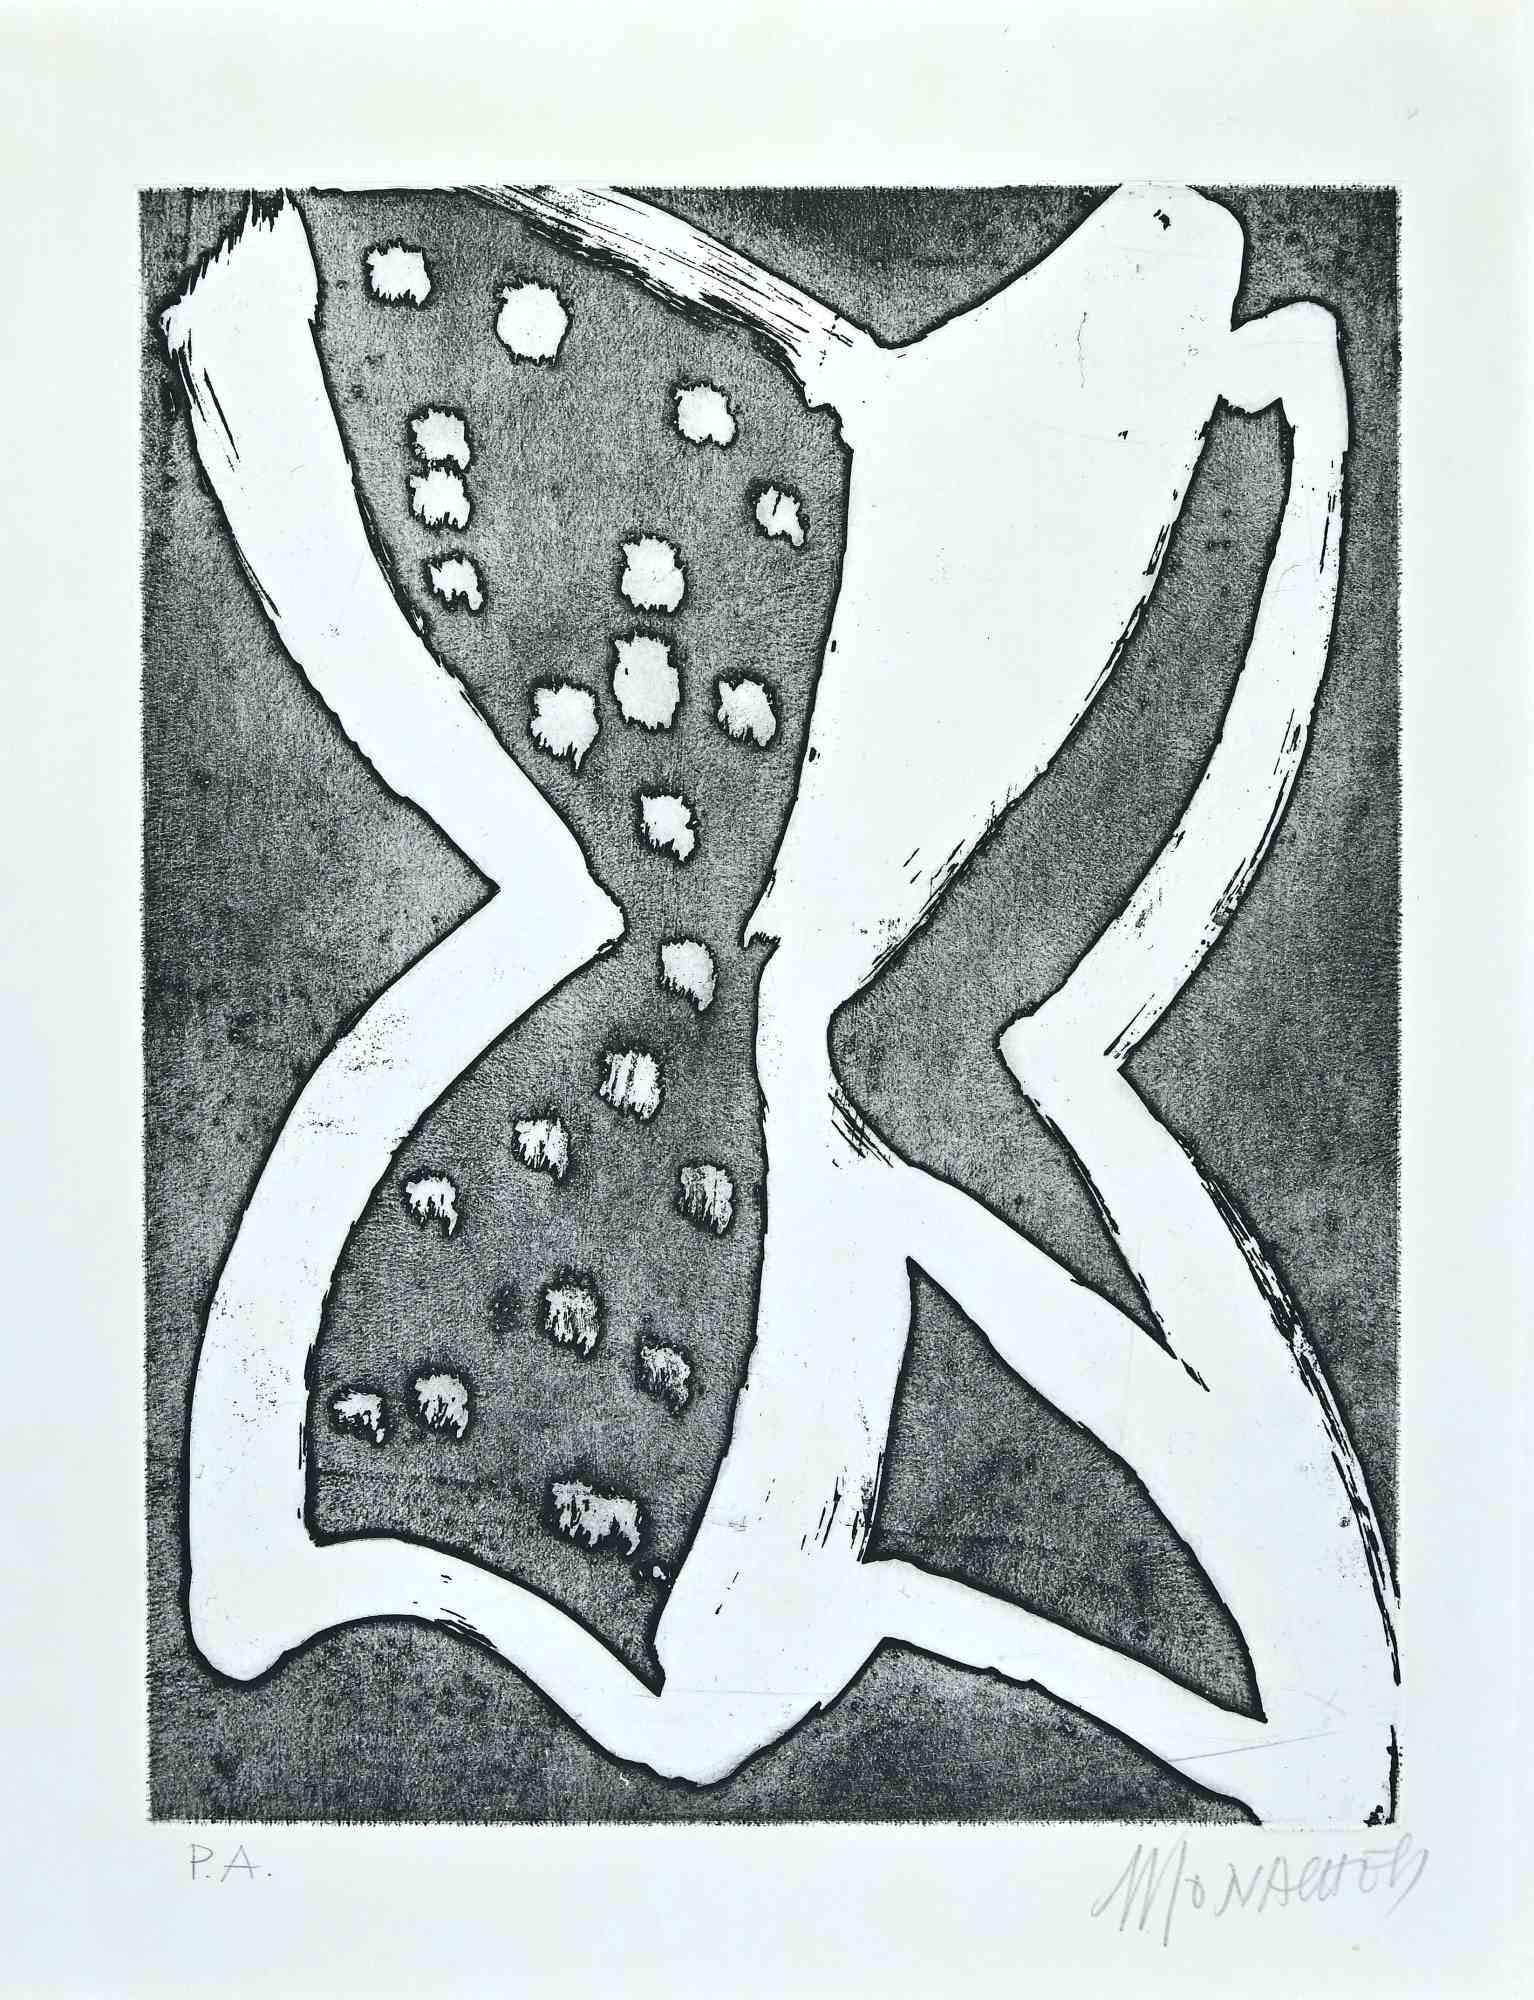 The Butterfly - Original Etching by Sante Monachesi - 1970s